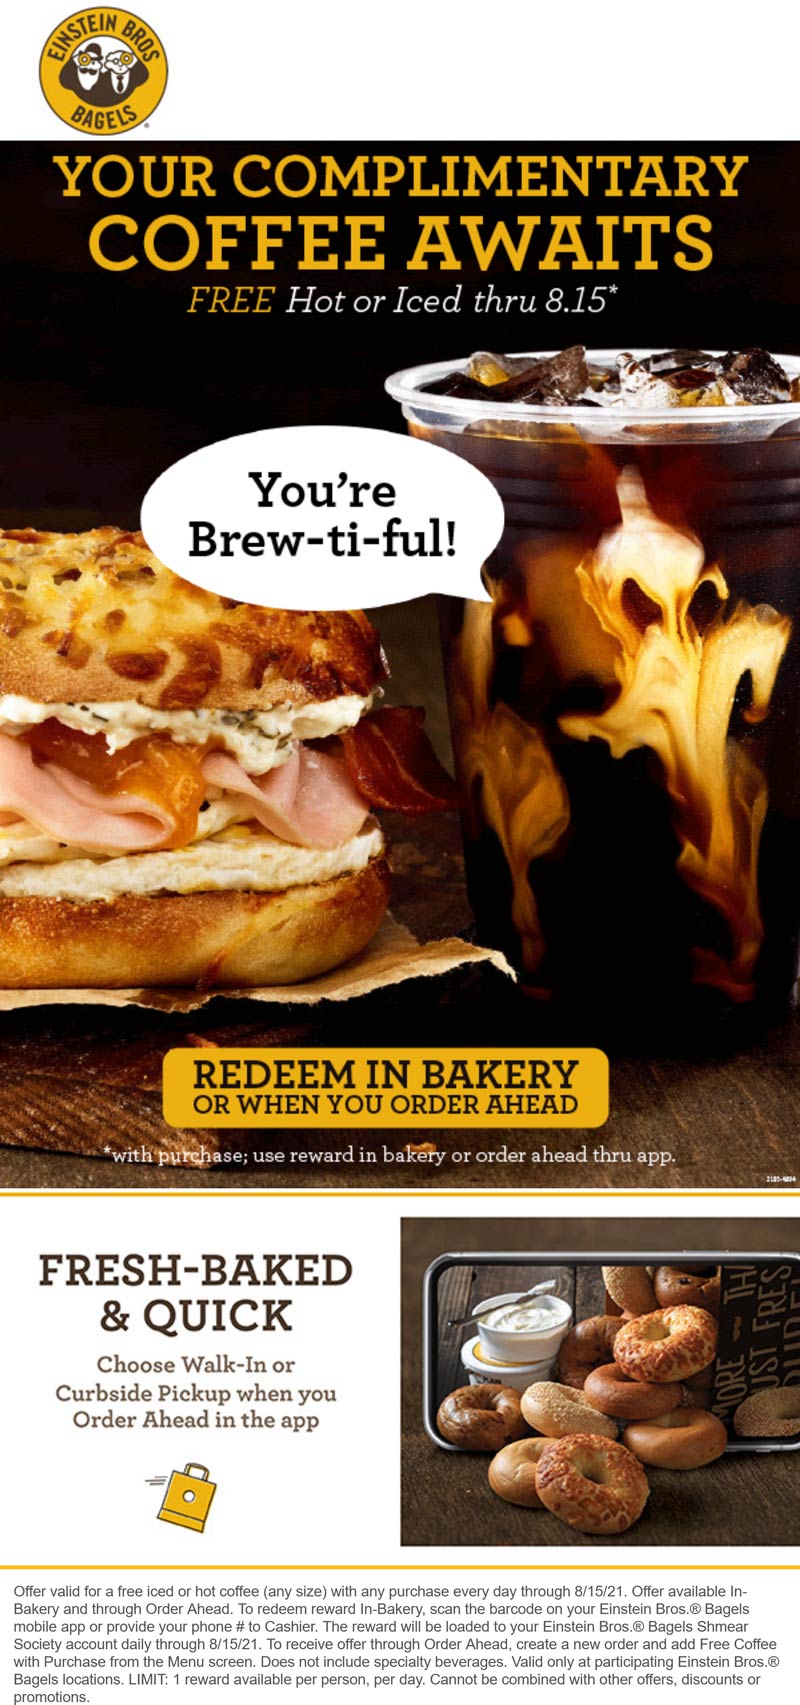 Einstein Bros Bagels restaurants Coupon  Free iced or hot coffee daily with purchase for rewards members at Einstein Bros Bagels #einsteinbrosbagels 